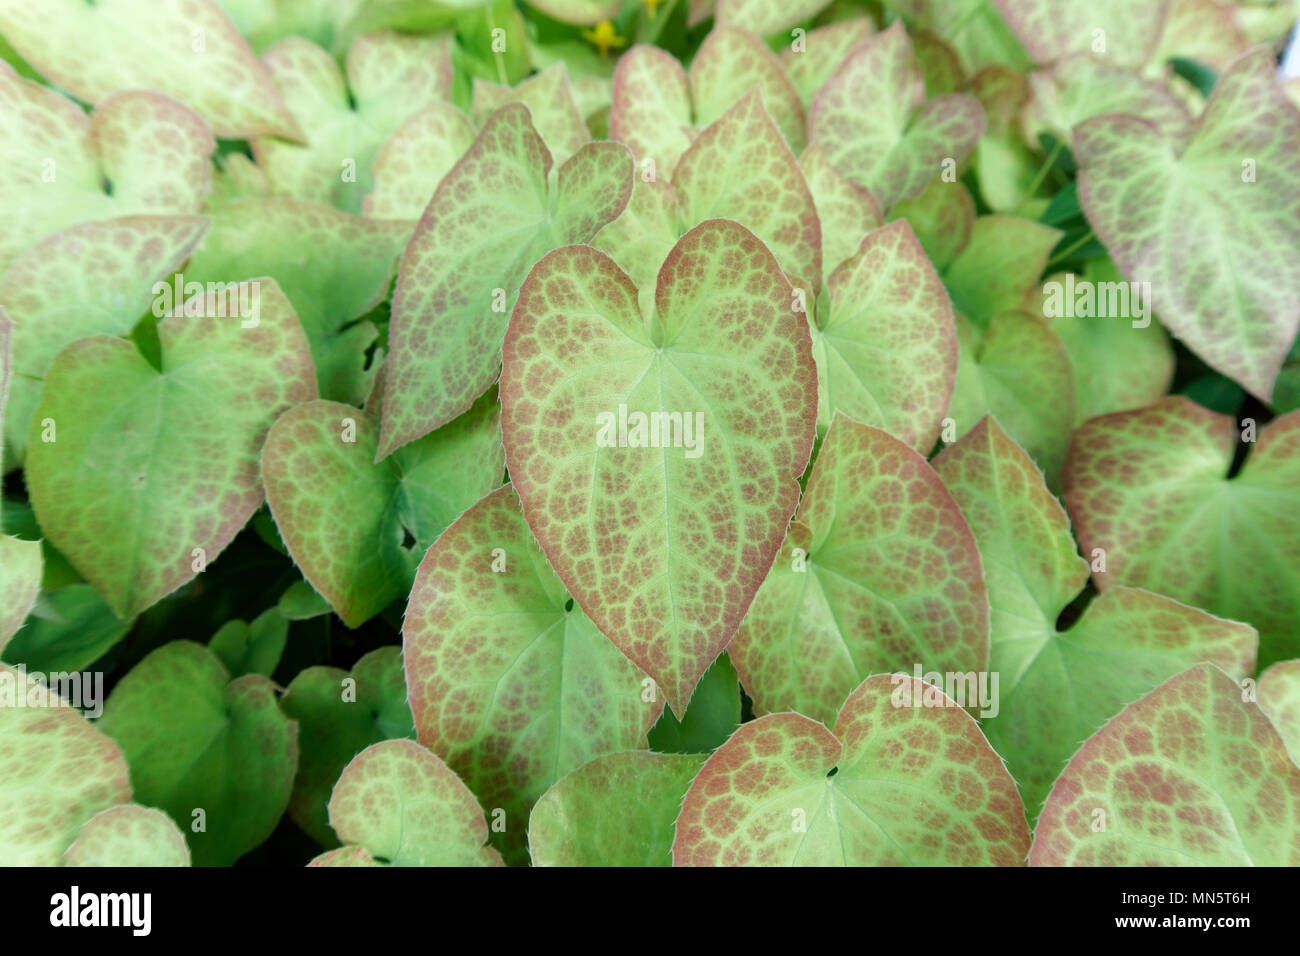 Close up of an epimedium plant (Botrytis paeoniae) with heart-shaped red and green leaves in spring, Vancouver, BC, Canada Stock Photo